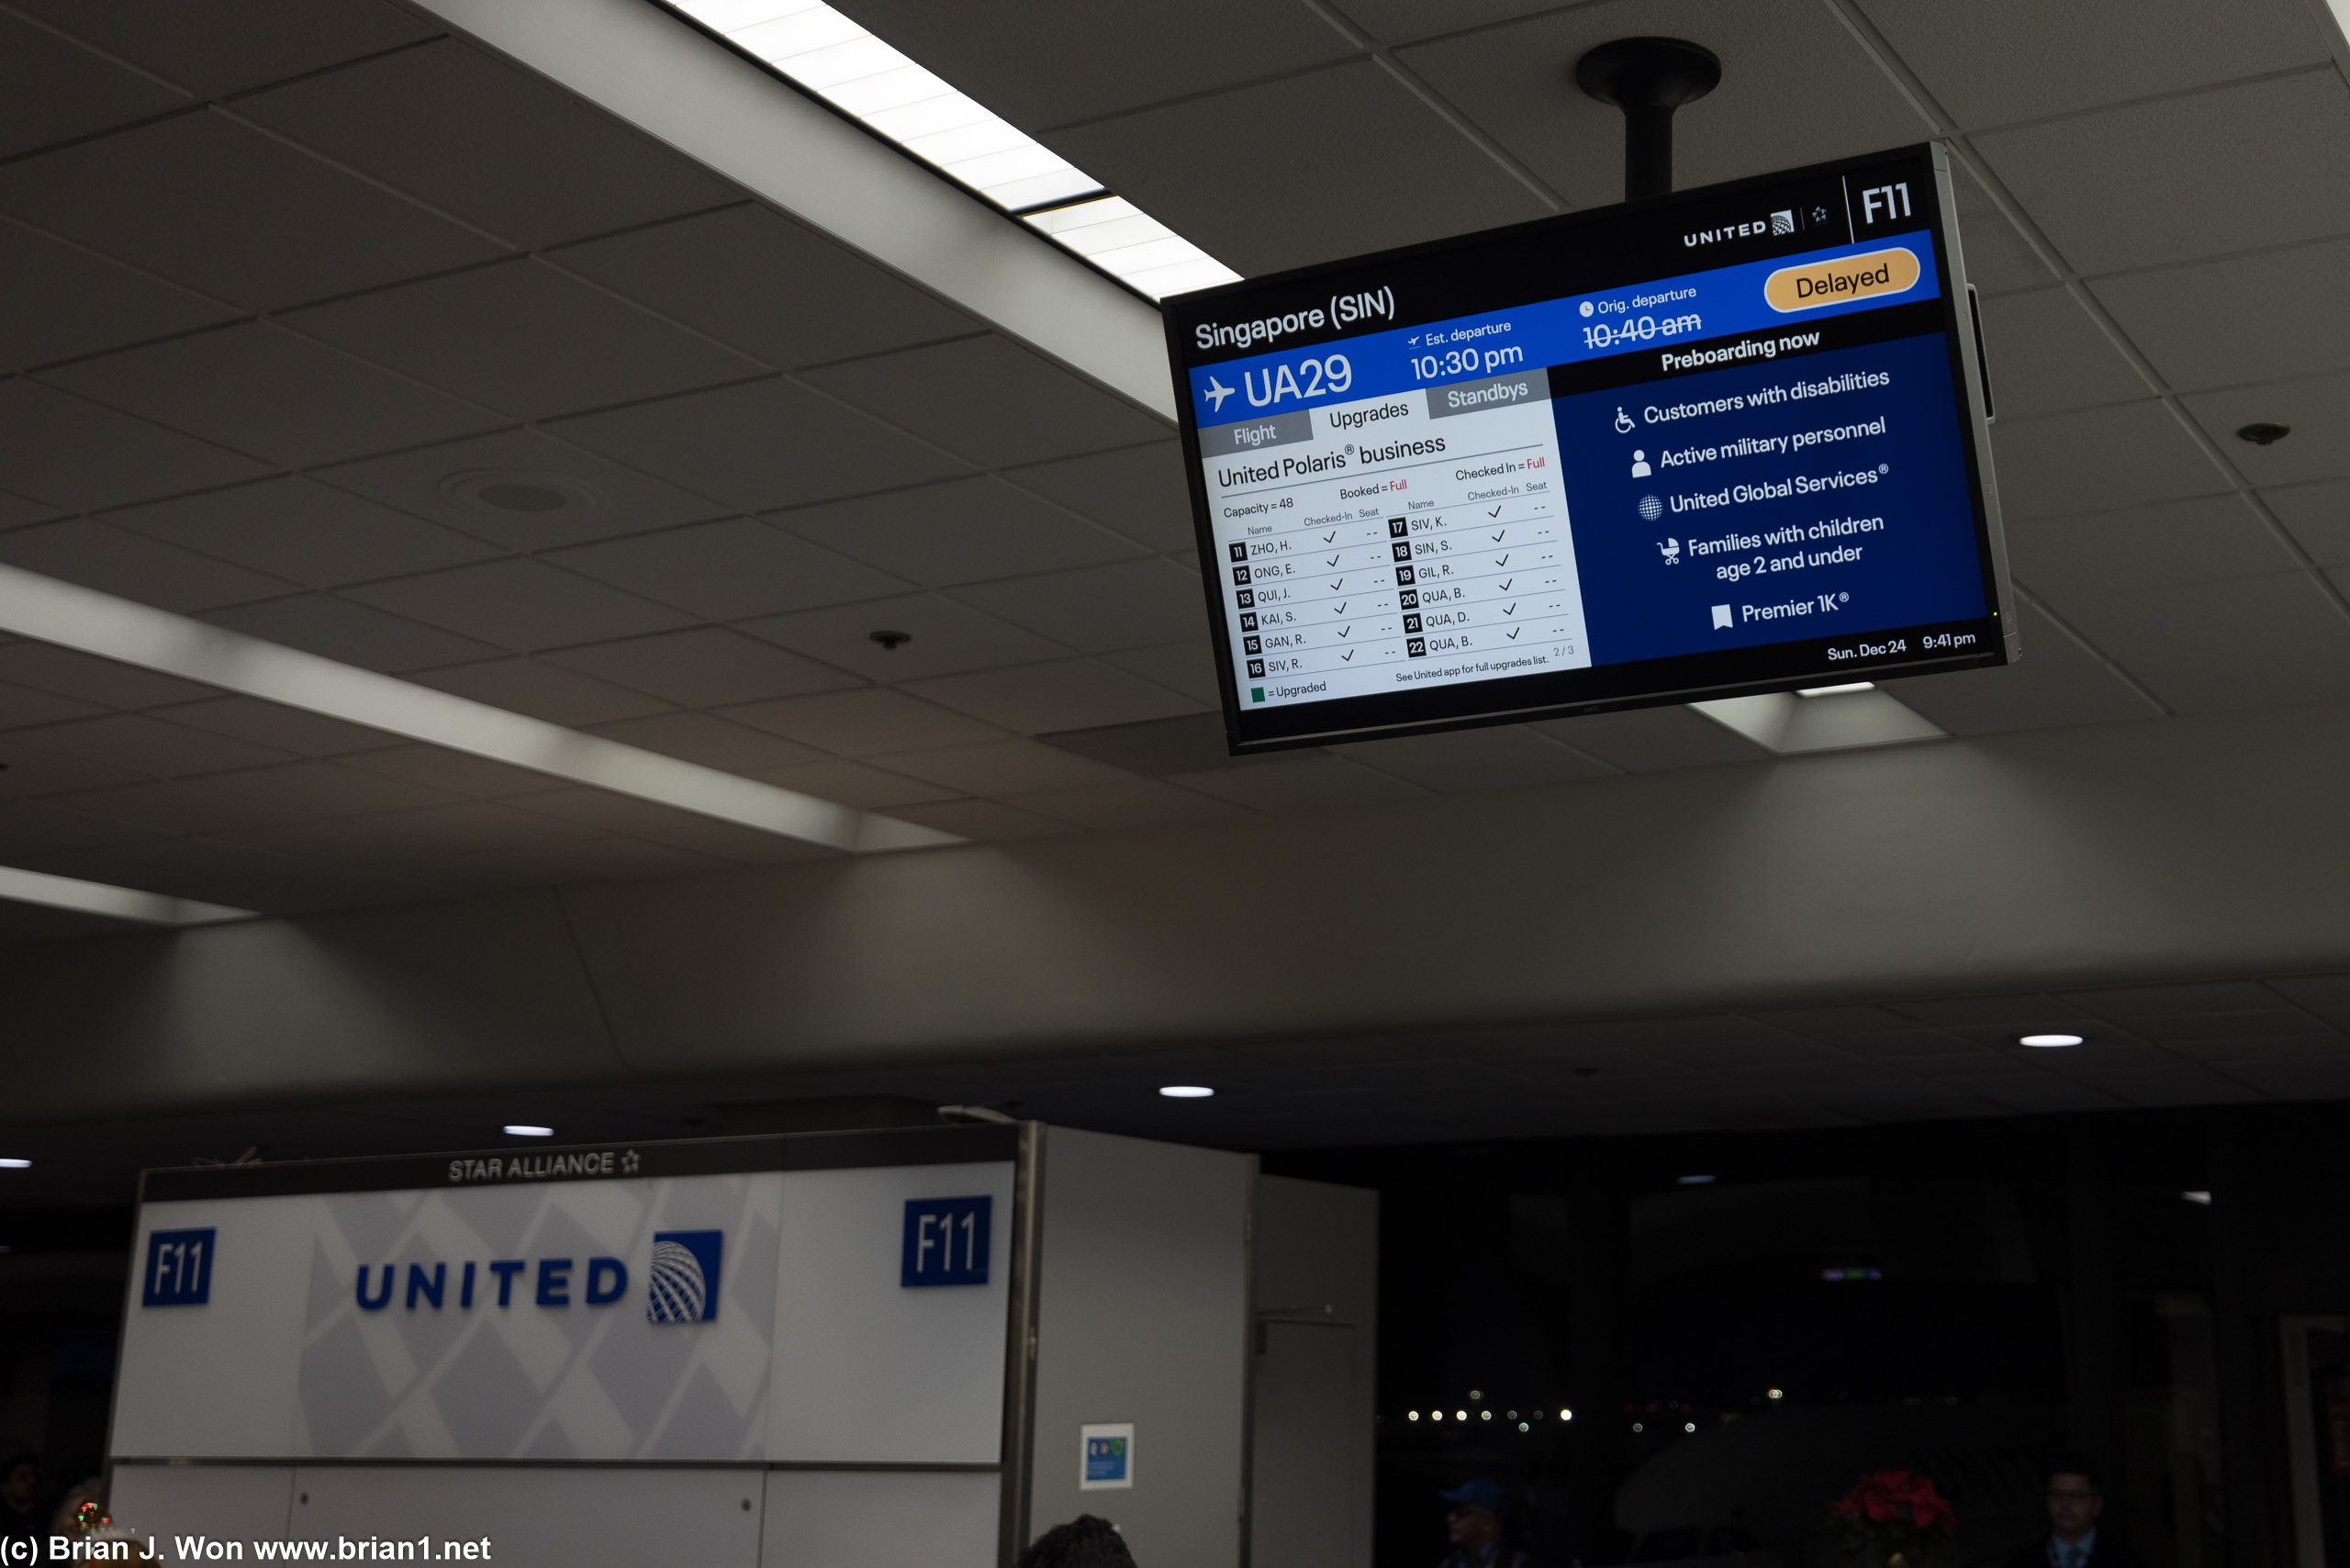 Nearly 12 hour delay for United flight 29 meant a very unusual departure from gate F11, Terminal 3.